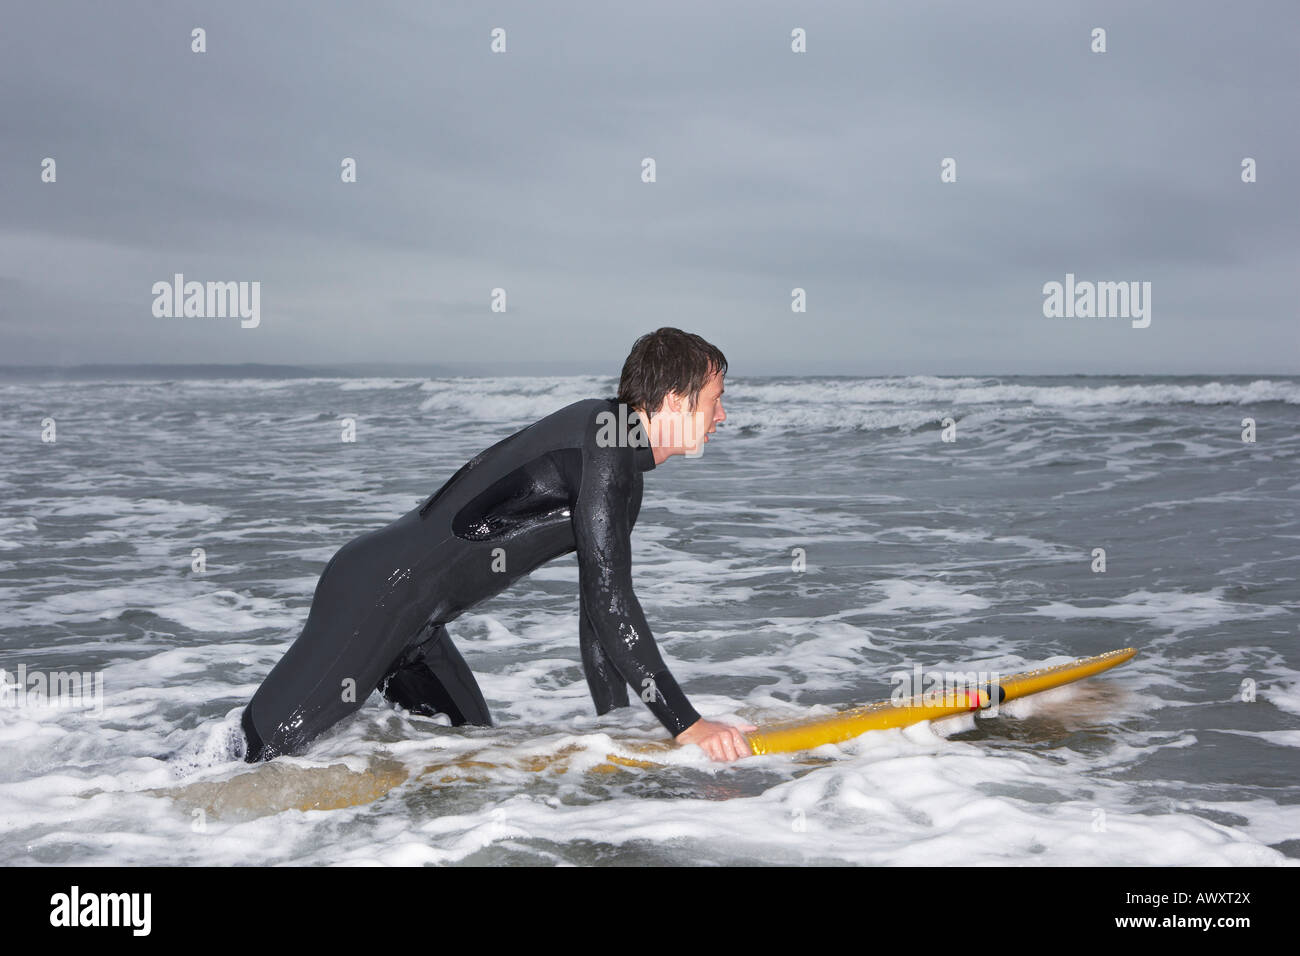 Surfer holding surfboard in water, side view Stock Photo